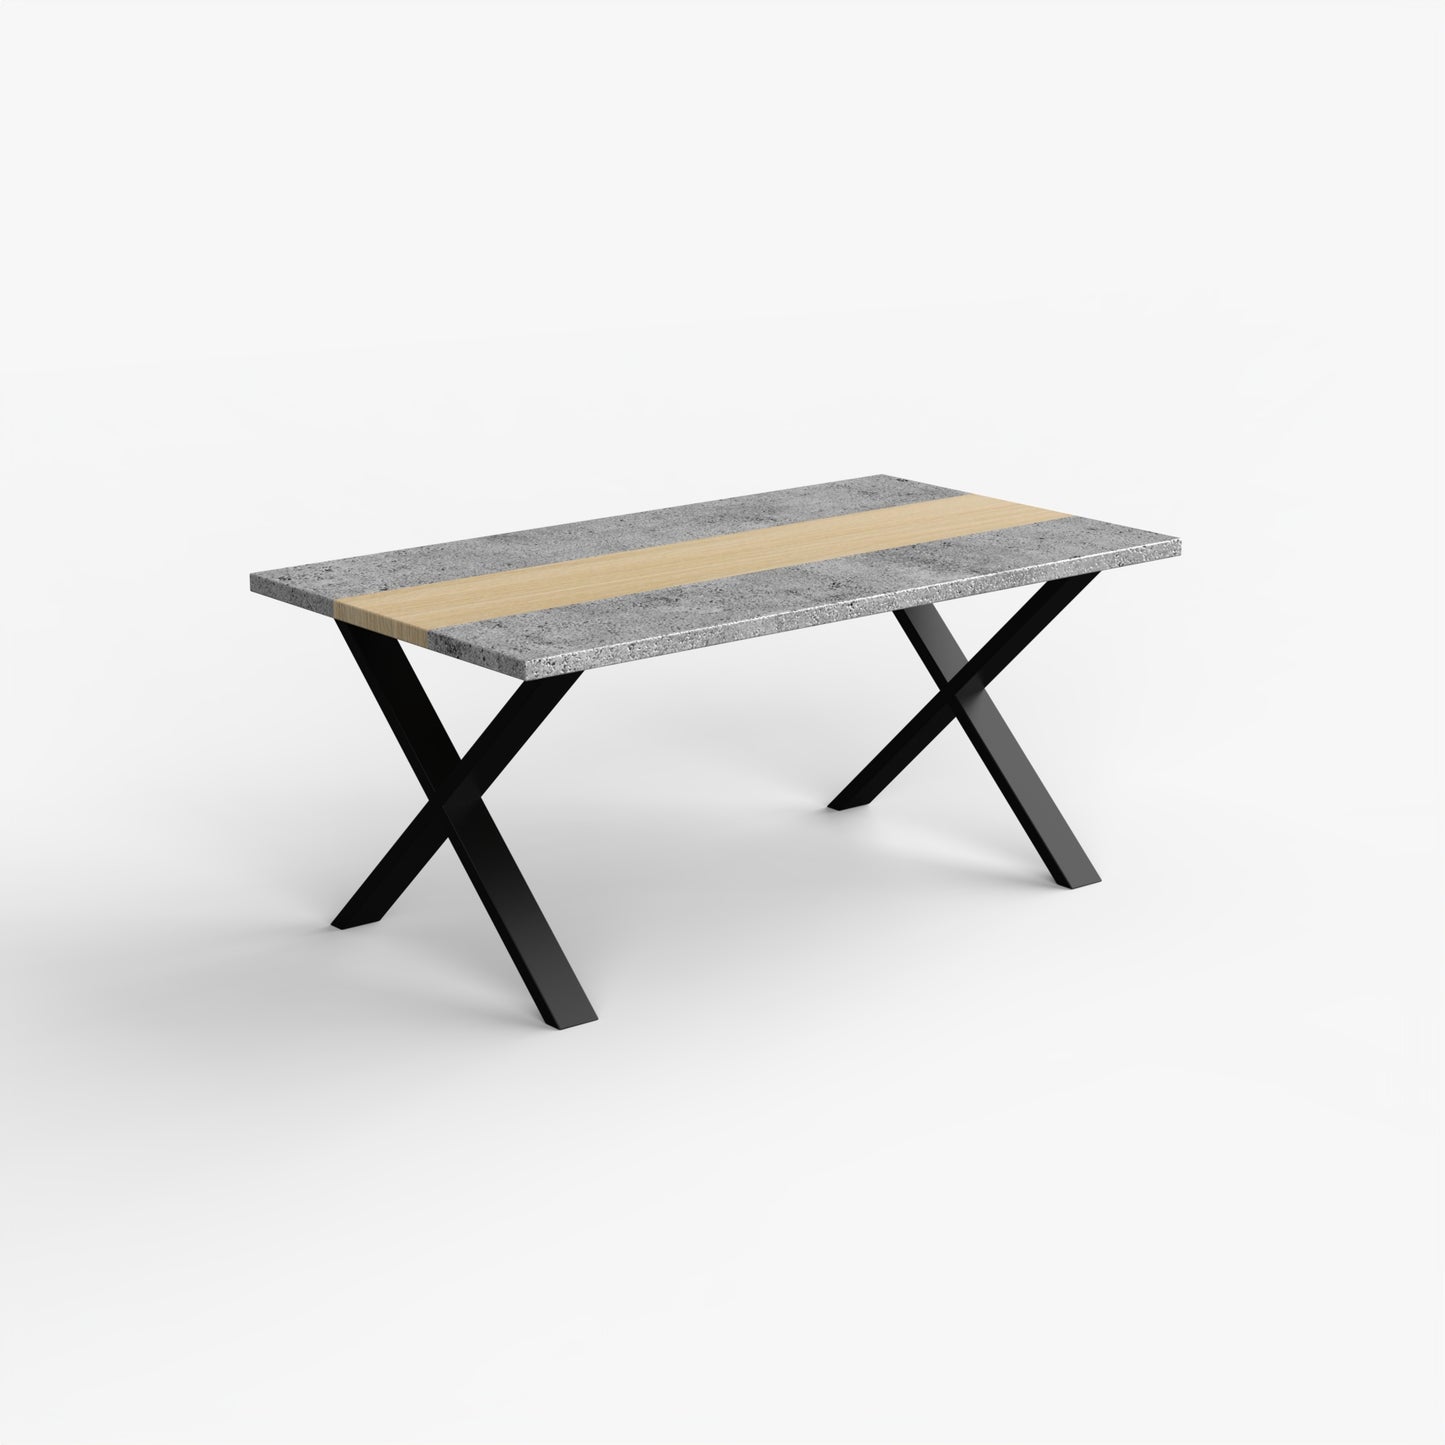 simple, durable, affordable dining table in nigeria